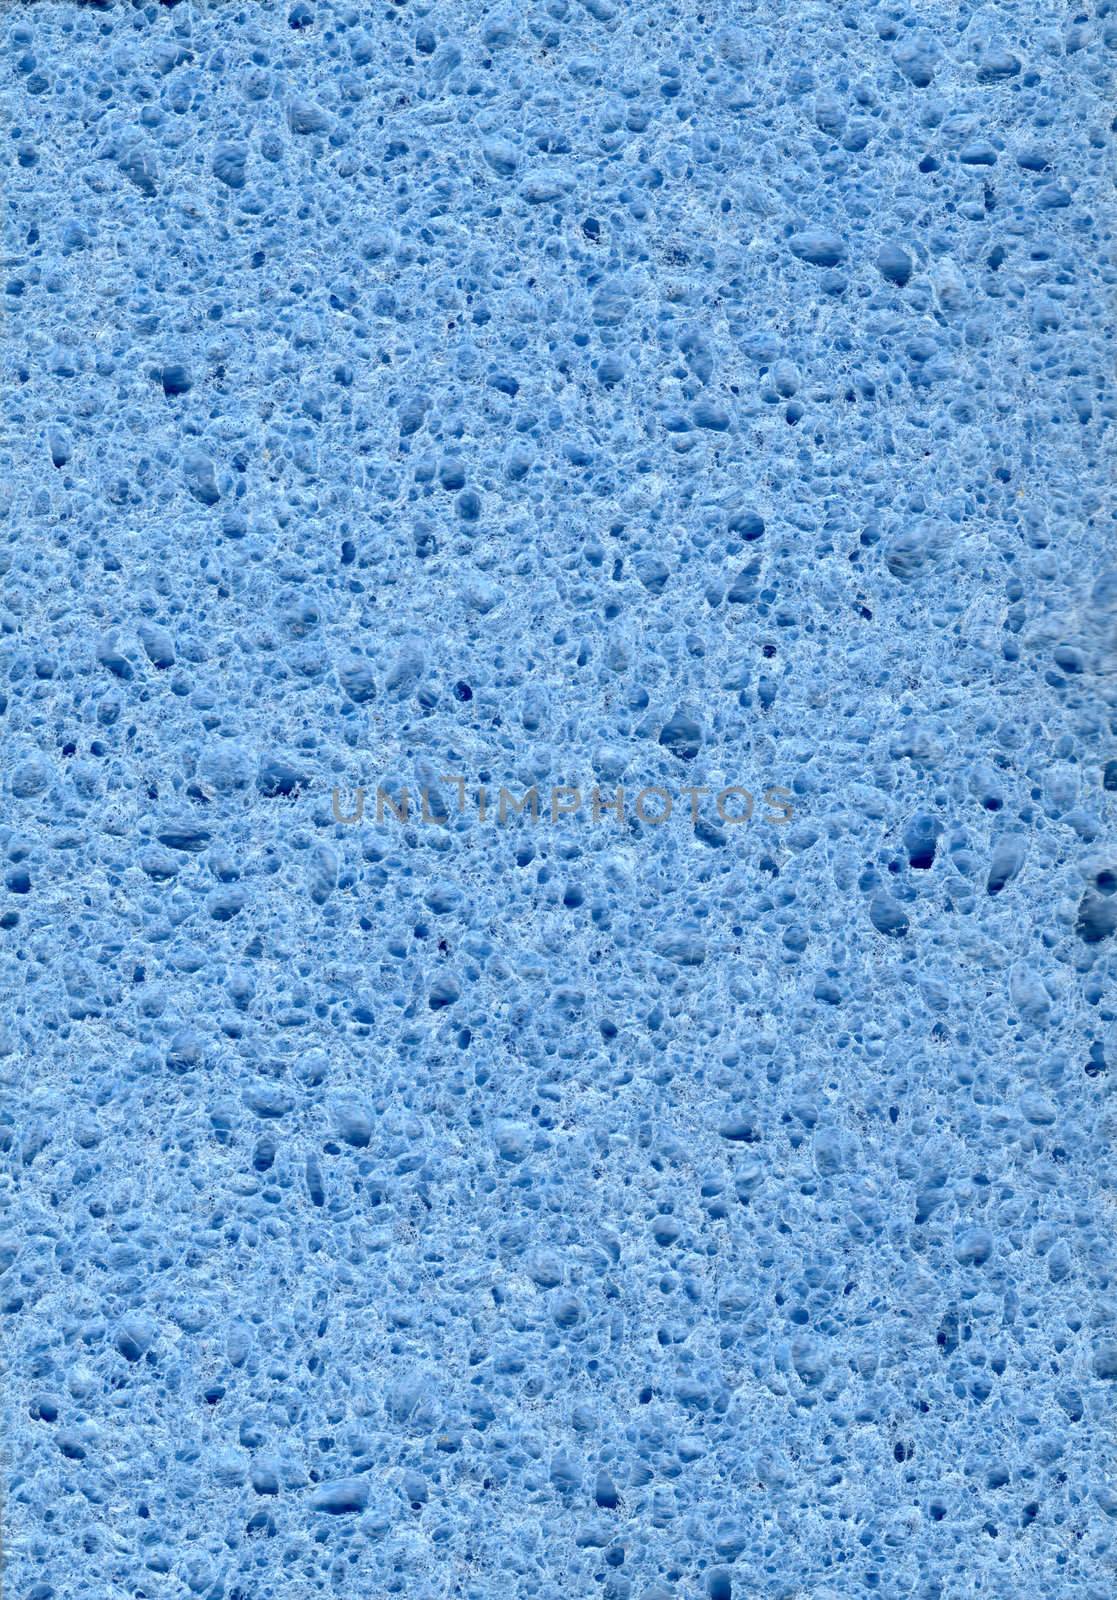 Blue Cellulose Sponge Material suitable for background or texture